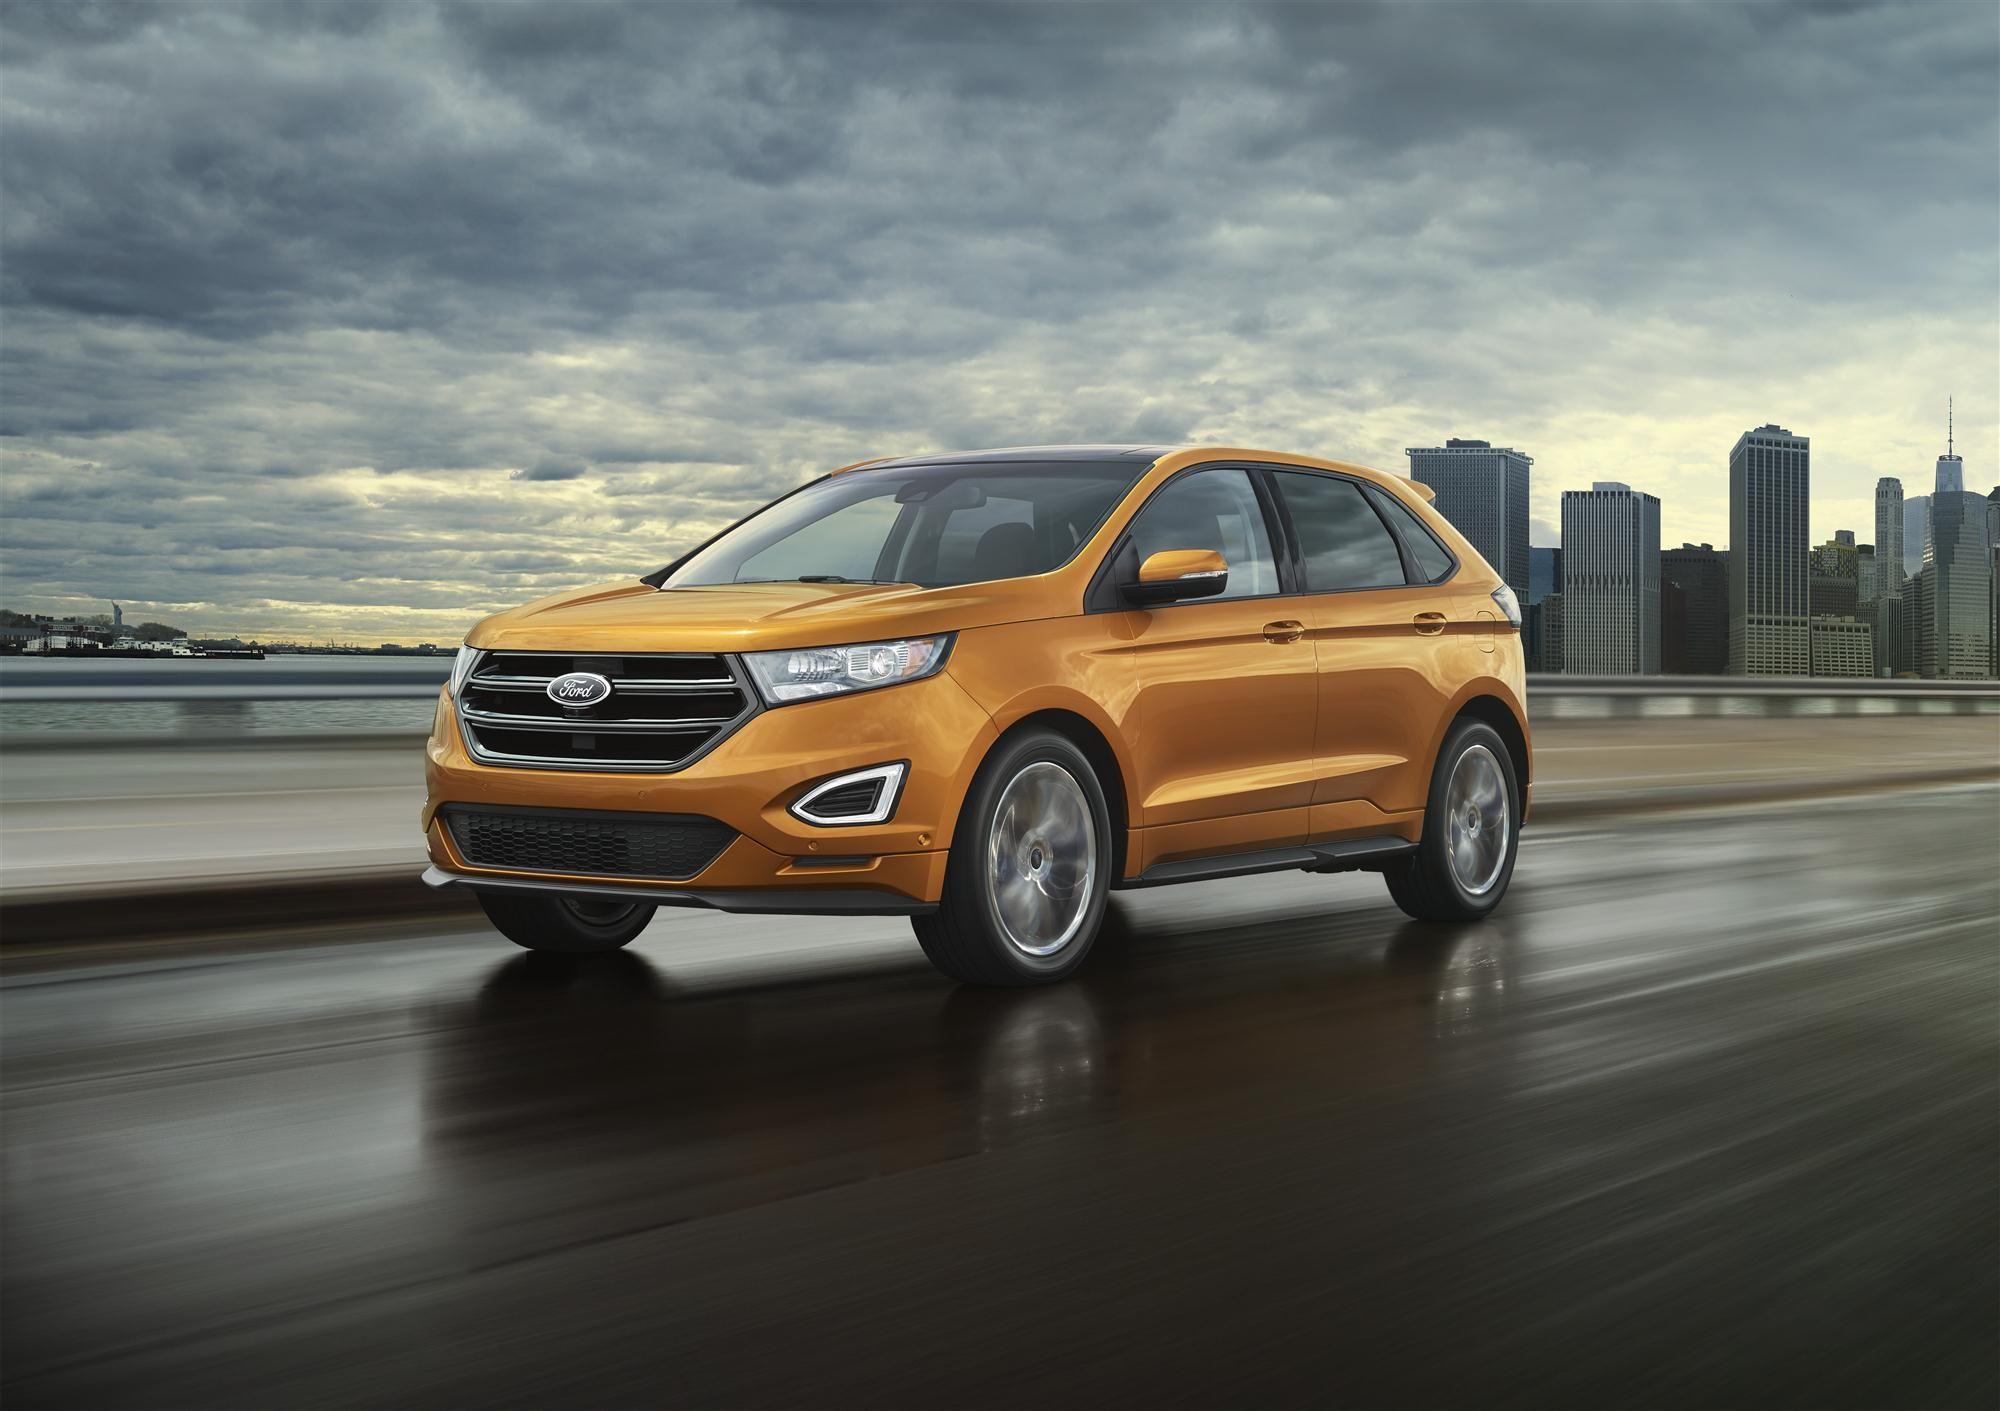 Ford Edge Wallpaper High Quality Resolution